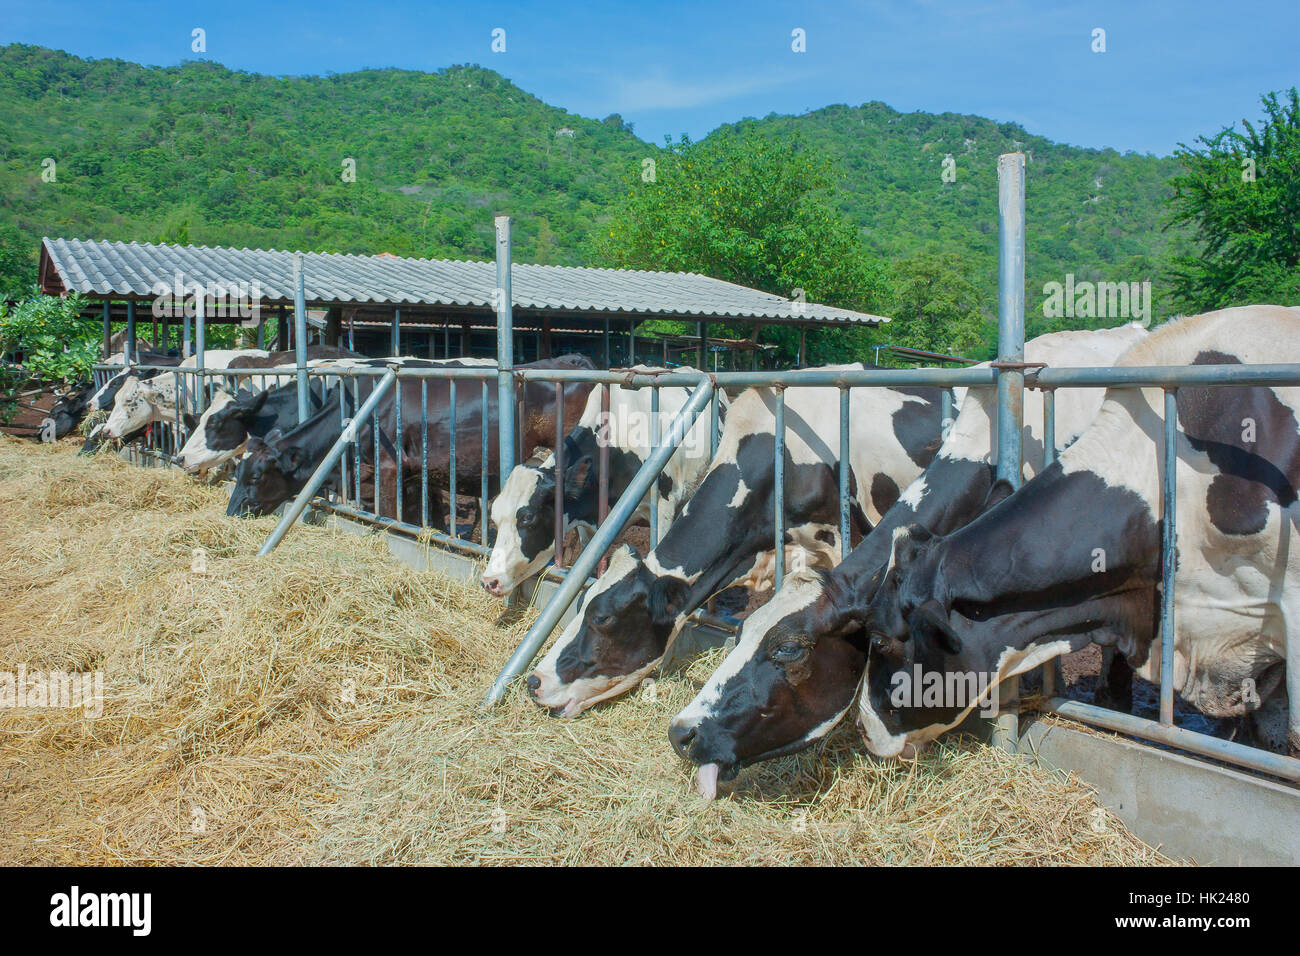 Herd Of Cows Eating Hay In The Stable Stock Photo